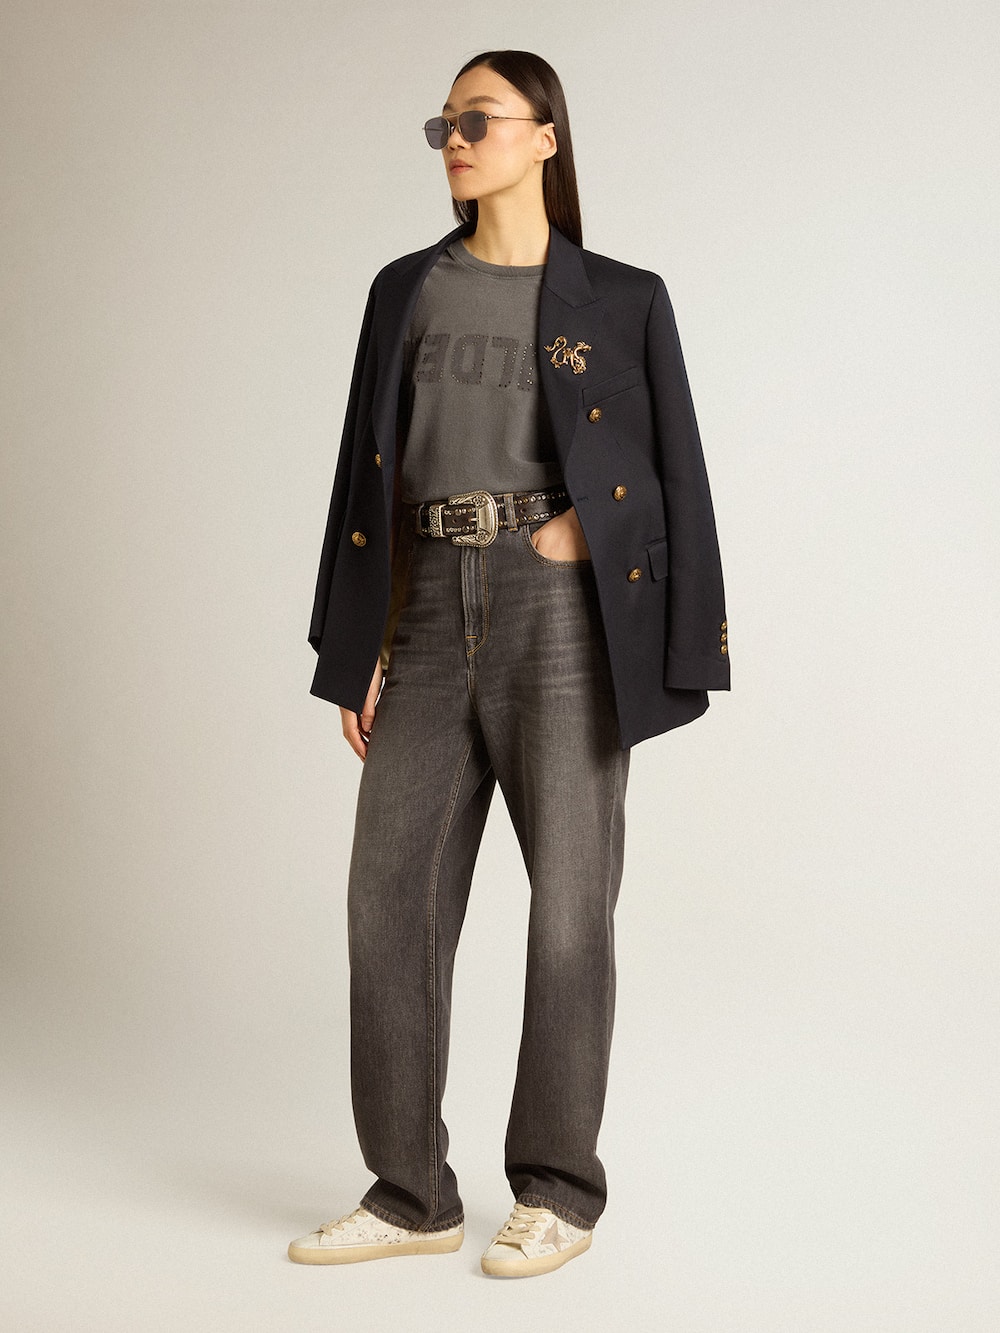 Golden Goose - Women’s black jeans with printed pocket in 